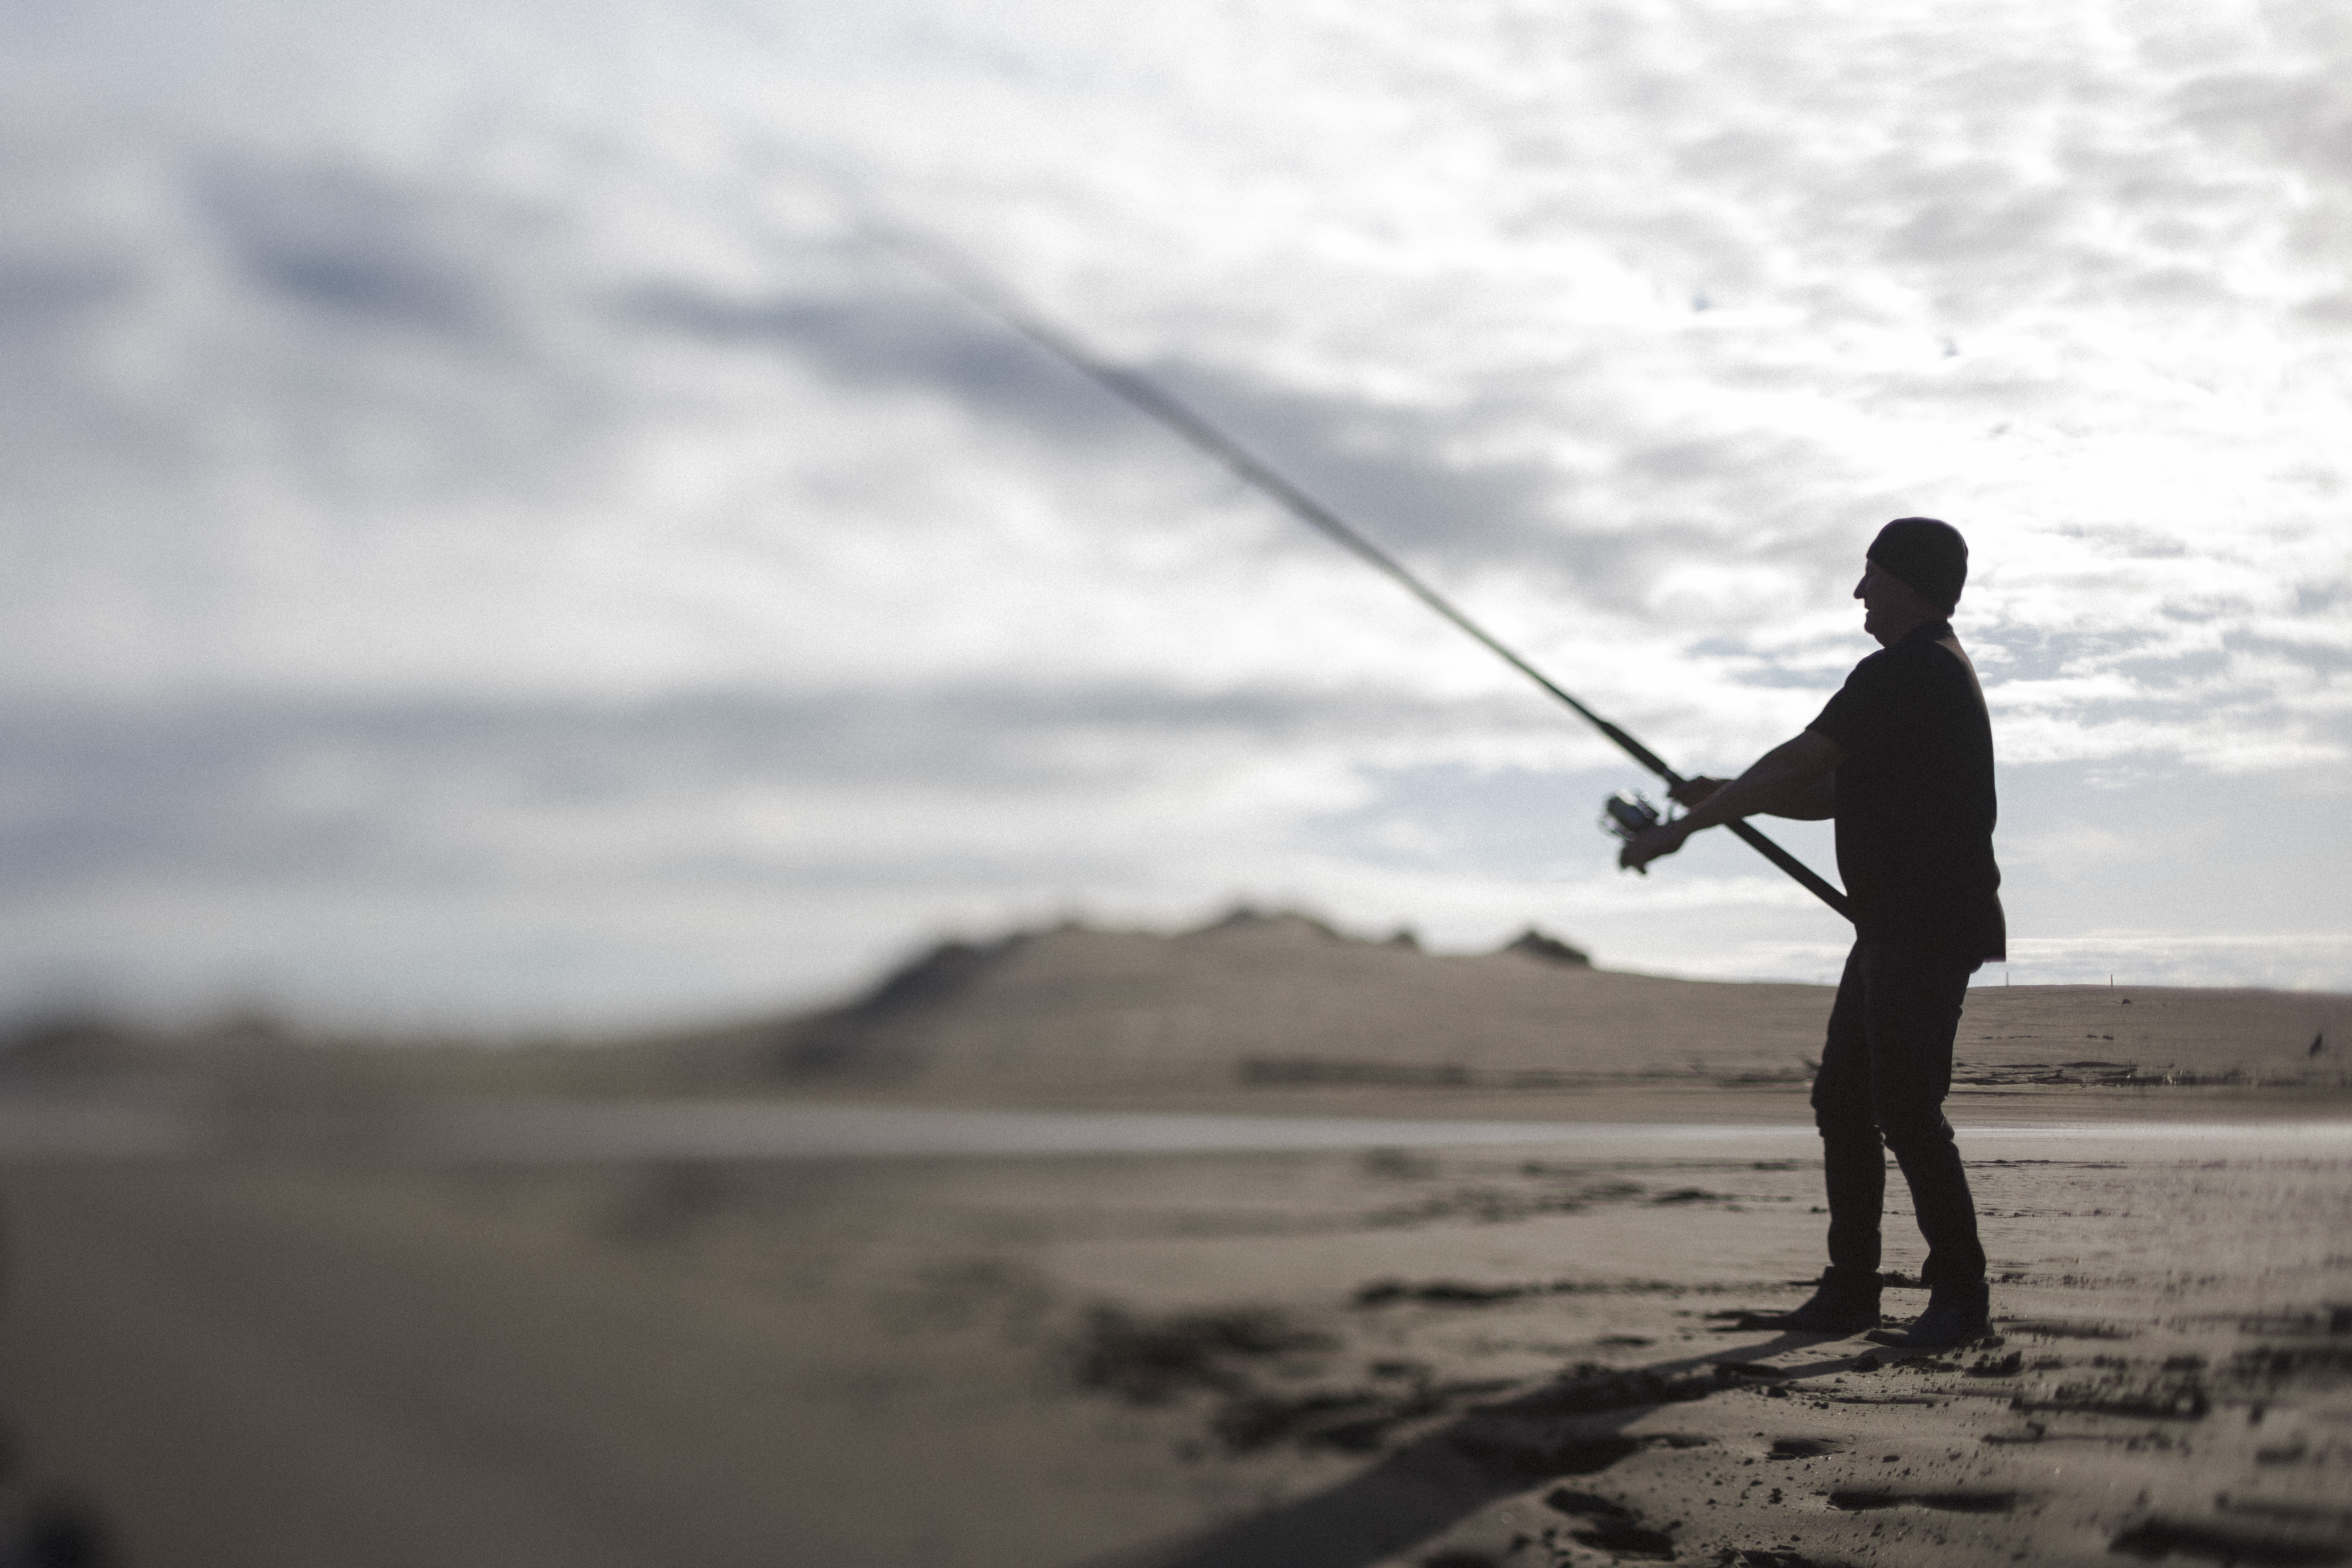 Man standing on a beach with a fishing line